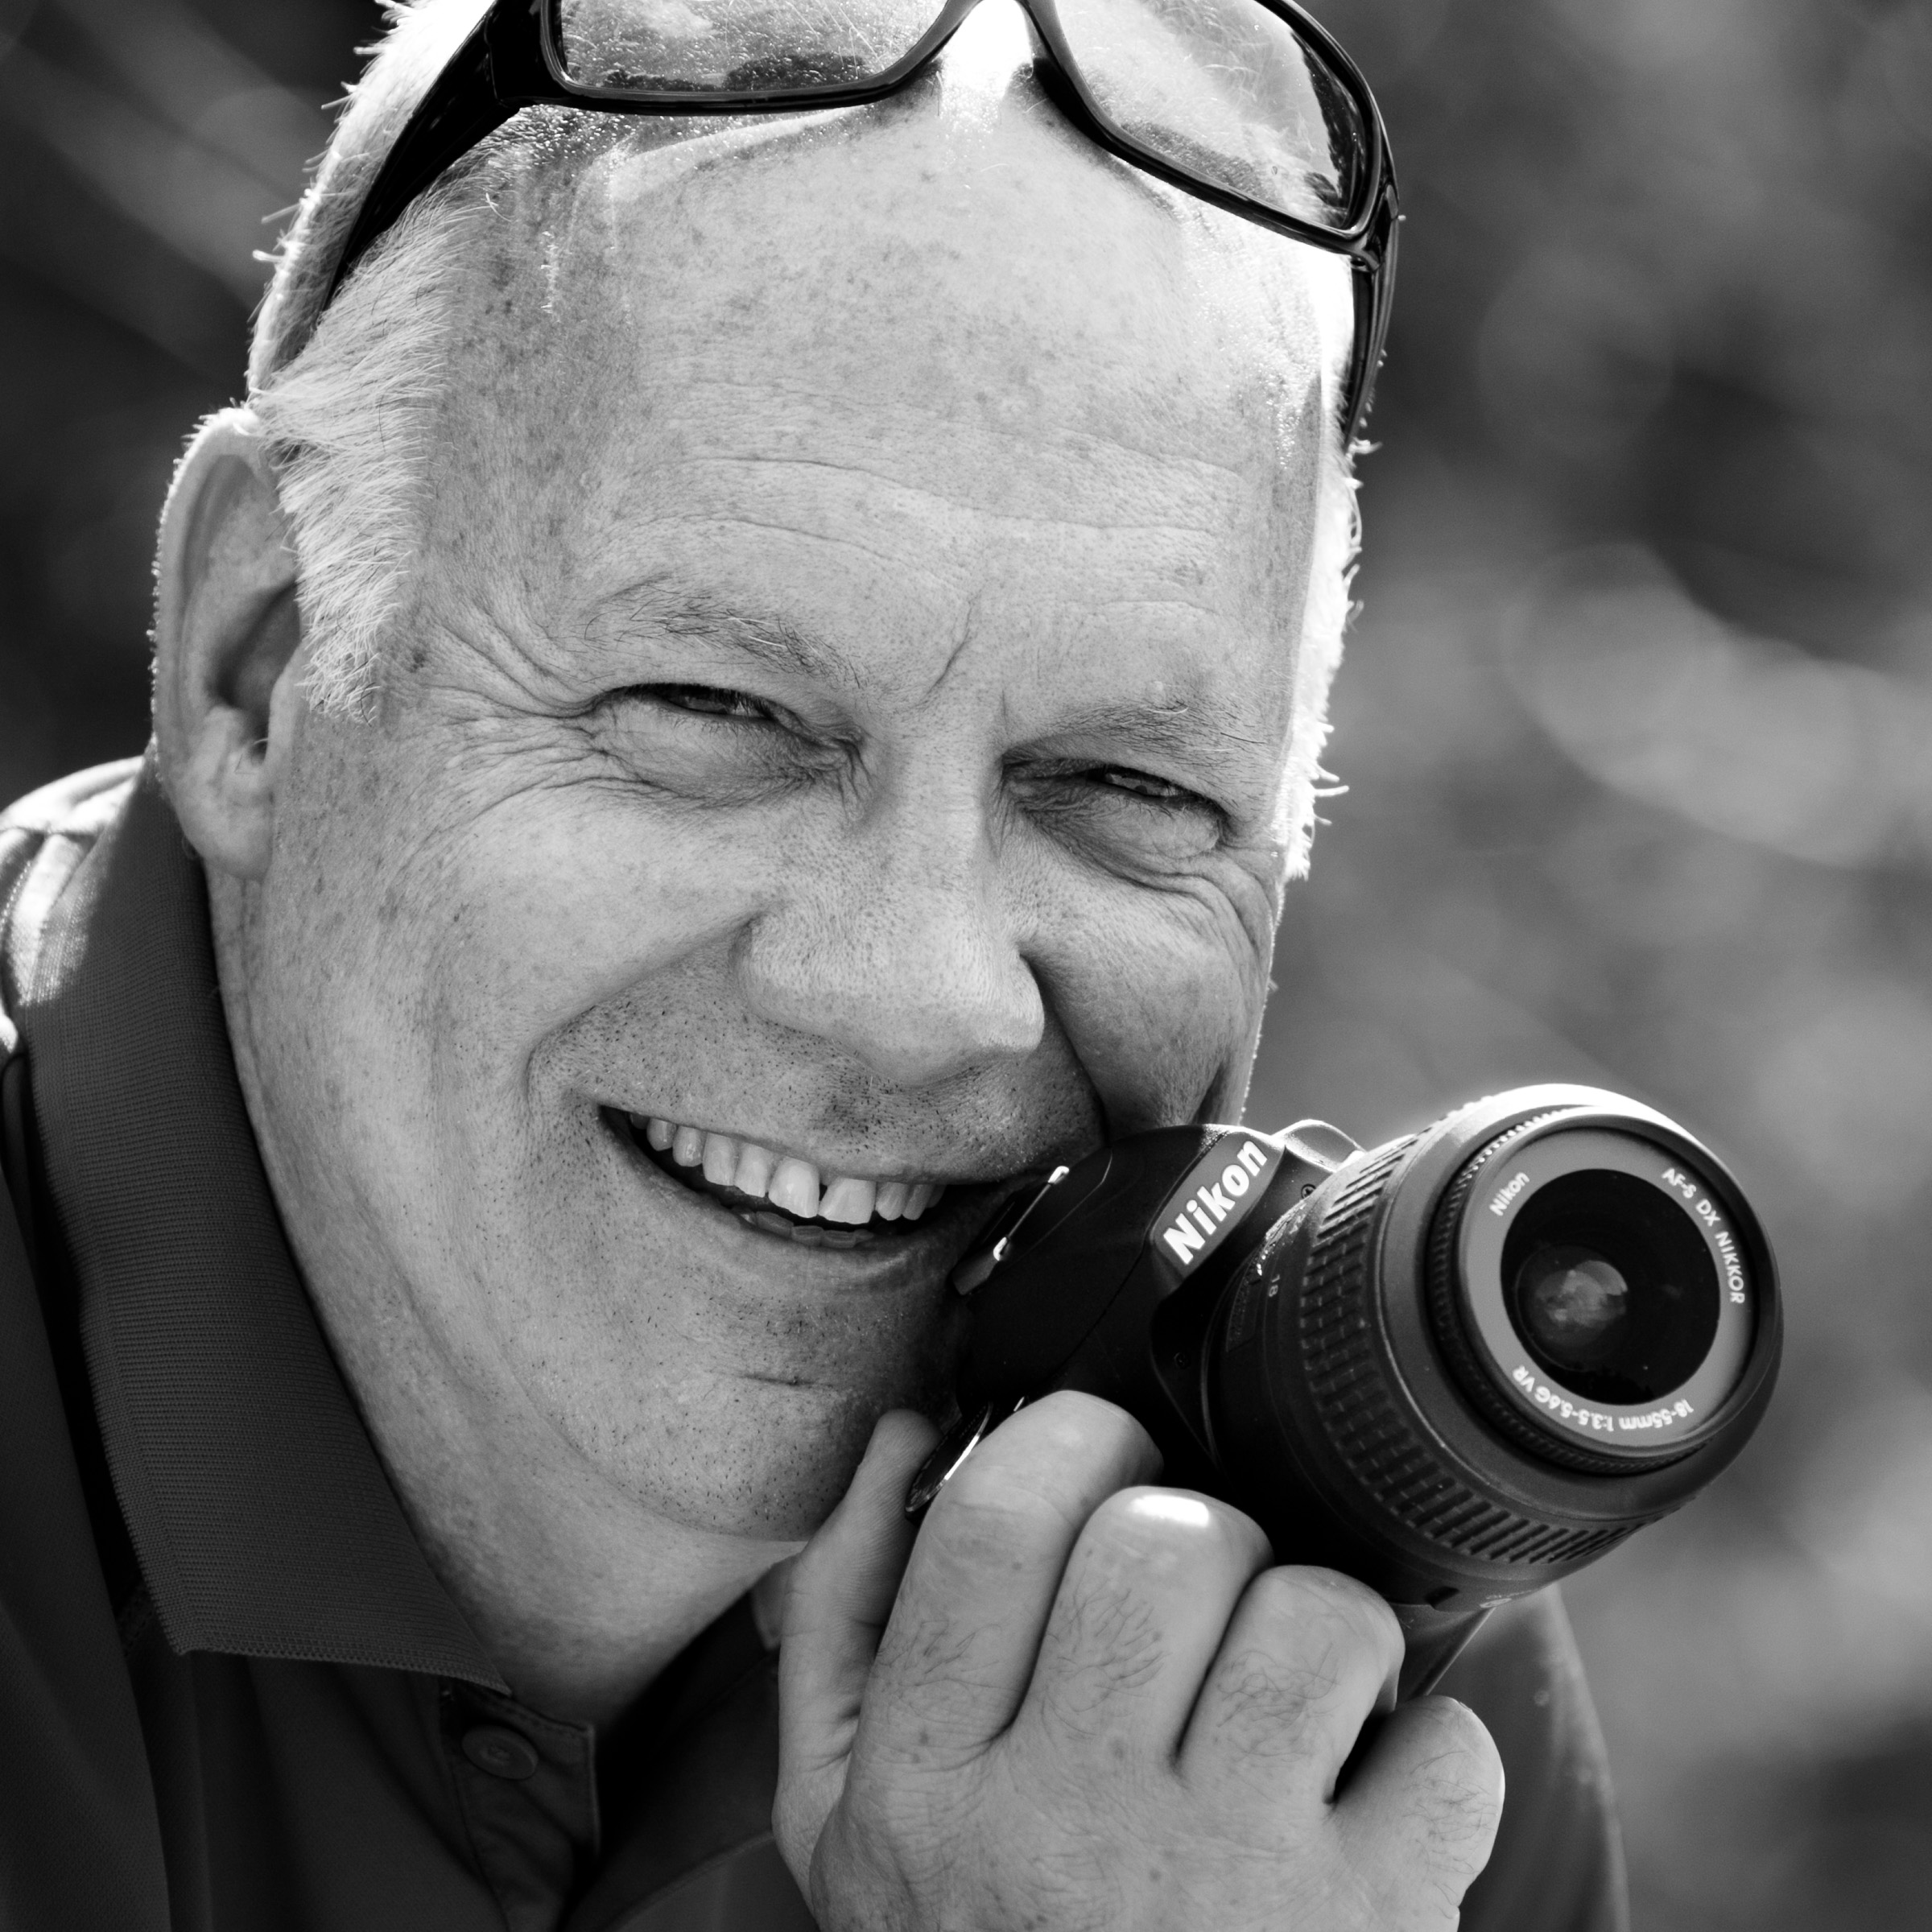 Mister Andre Dussault, photo lover holding is camera in black and white. Testimonial for ADVENTURES room - travels & photo workshops.